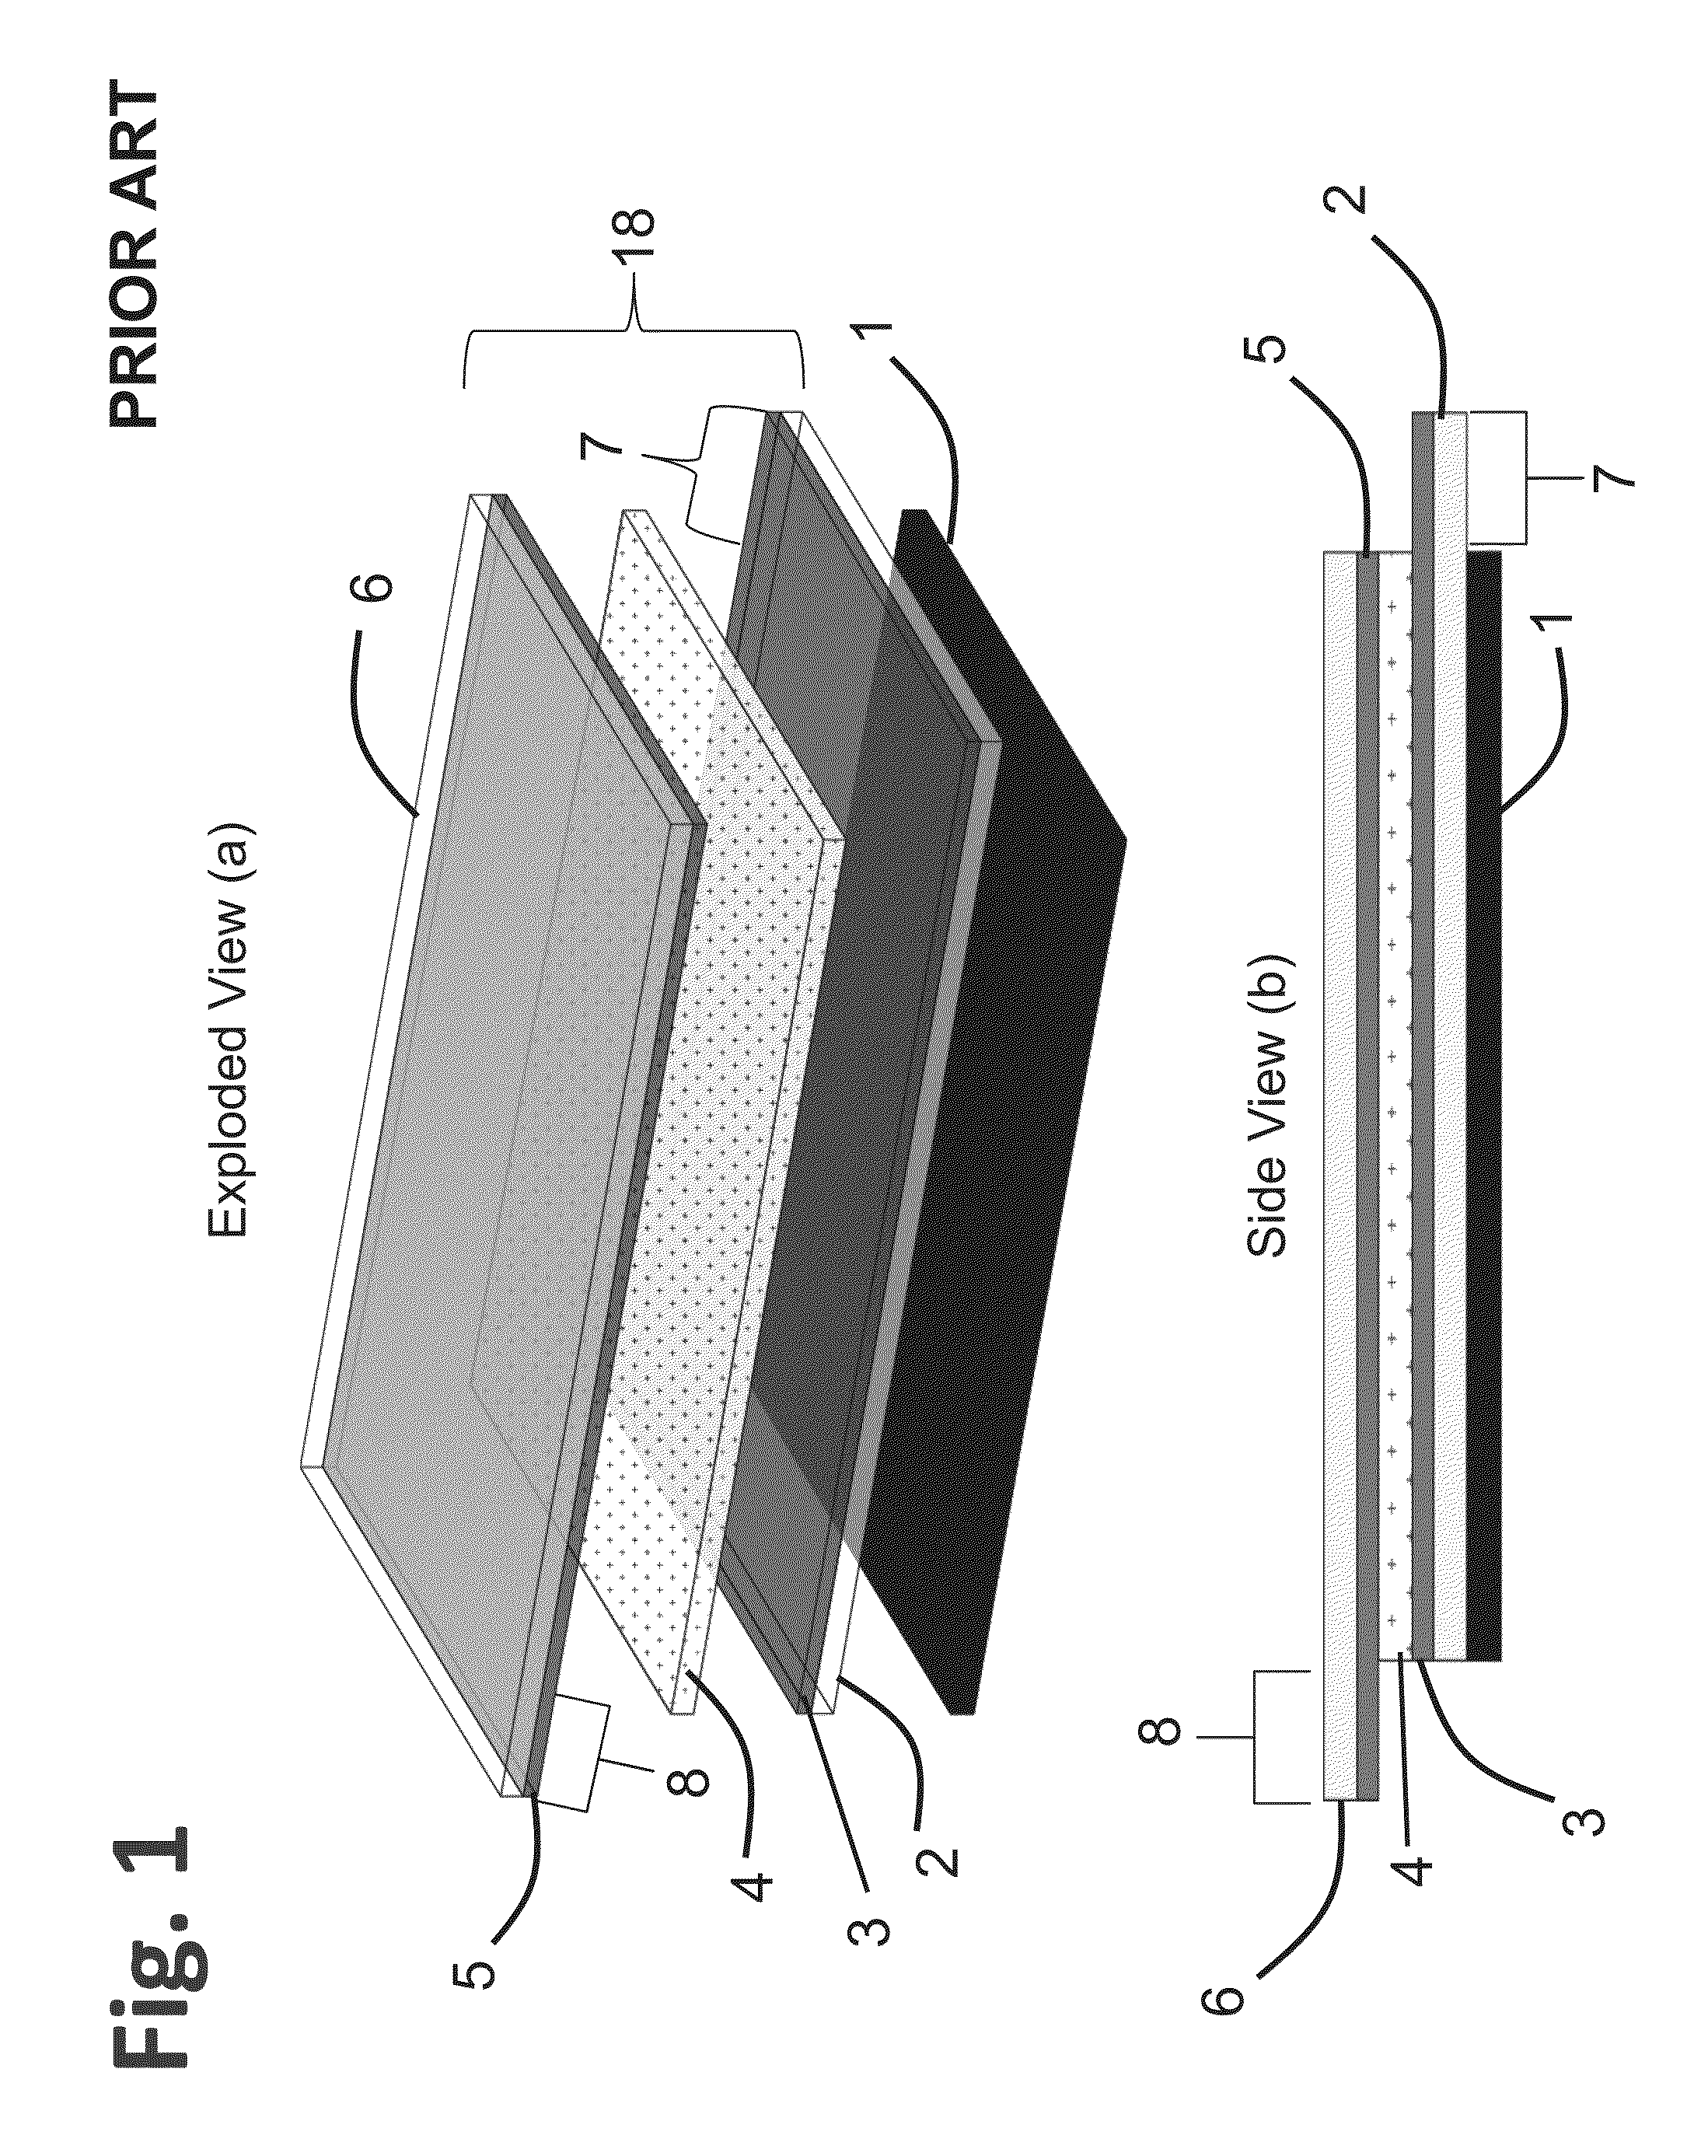 Electronic display with semitransparent back layer